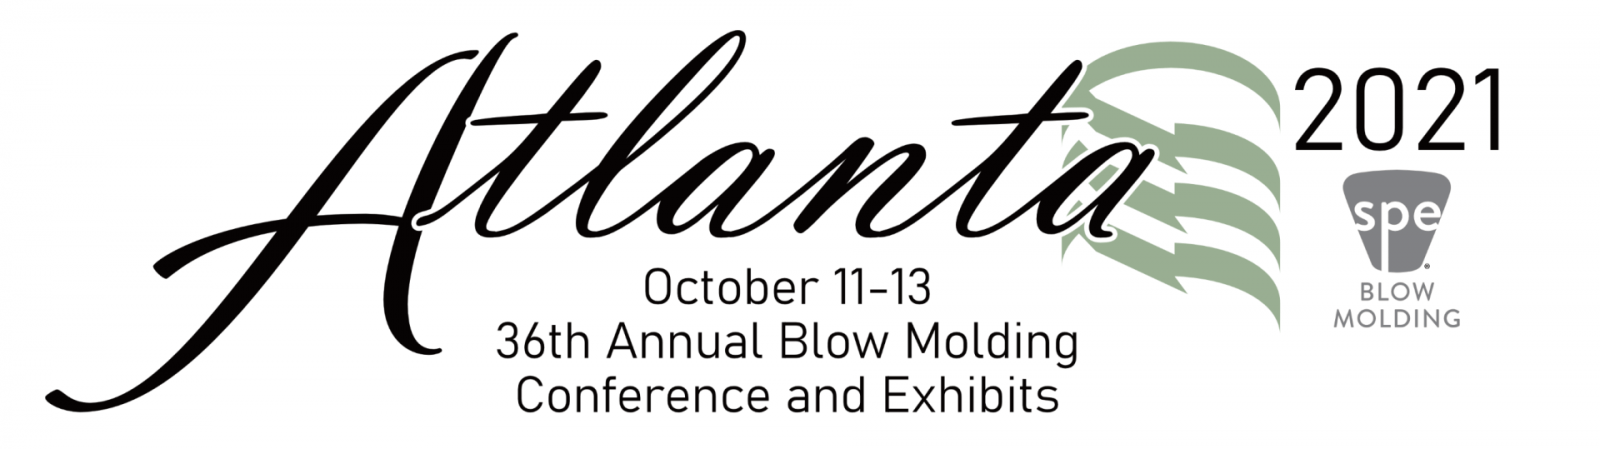 Annual Blow Molding Conference 2021